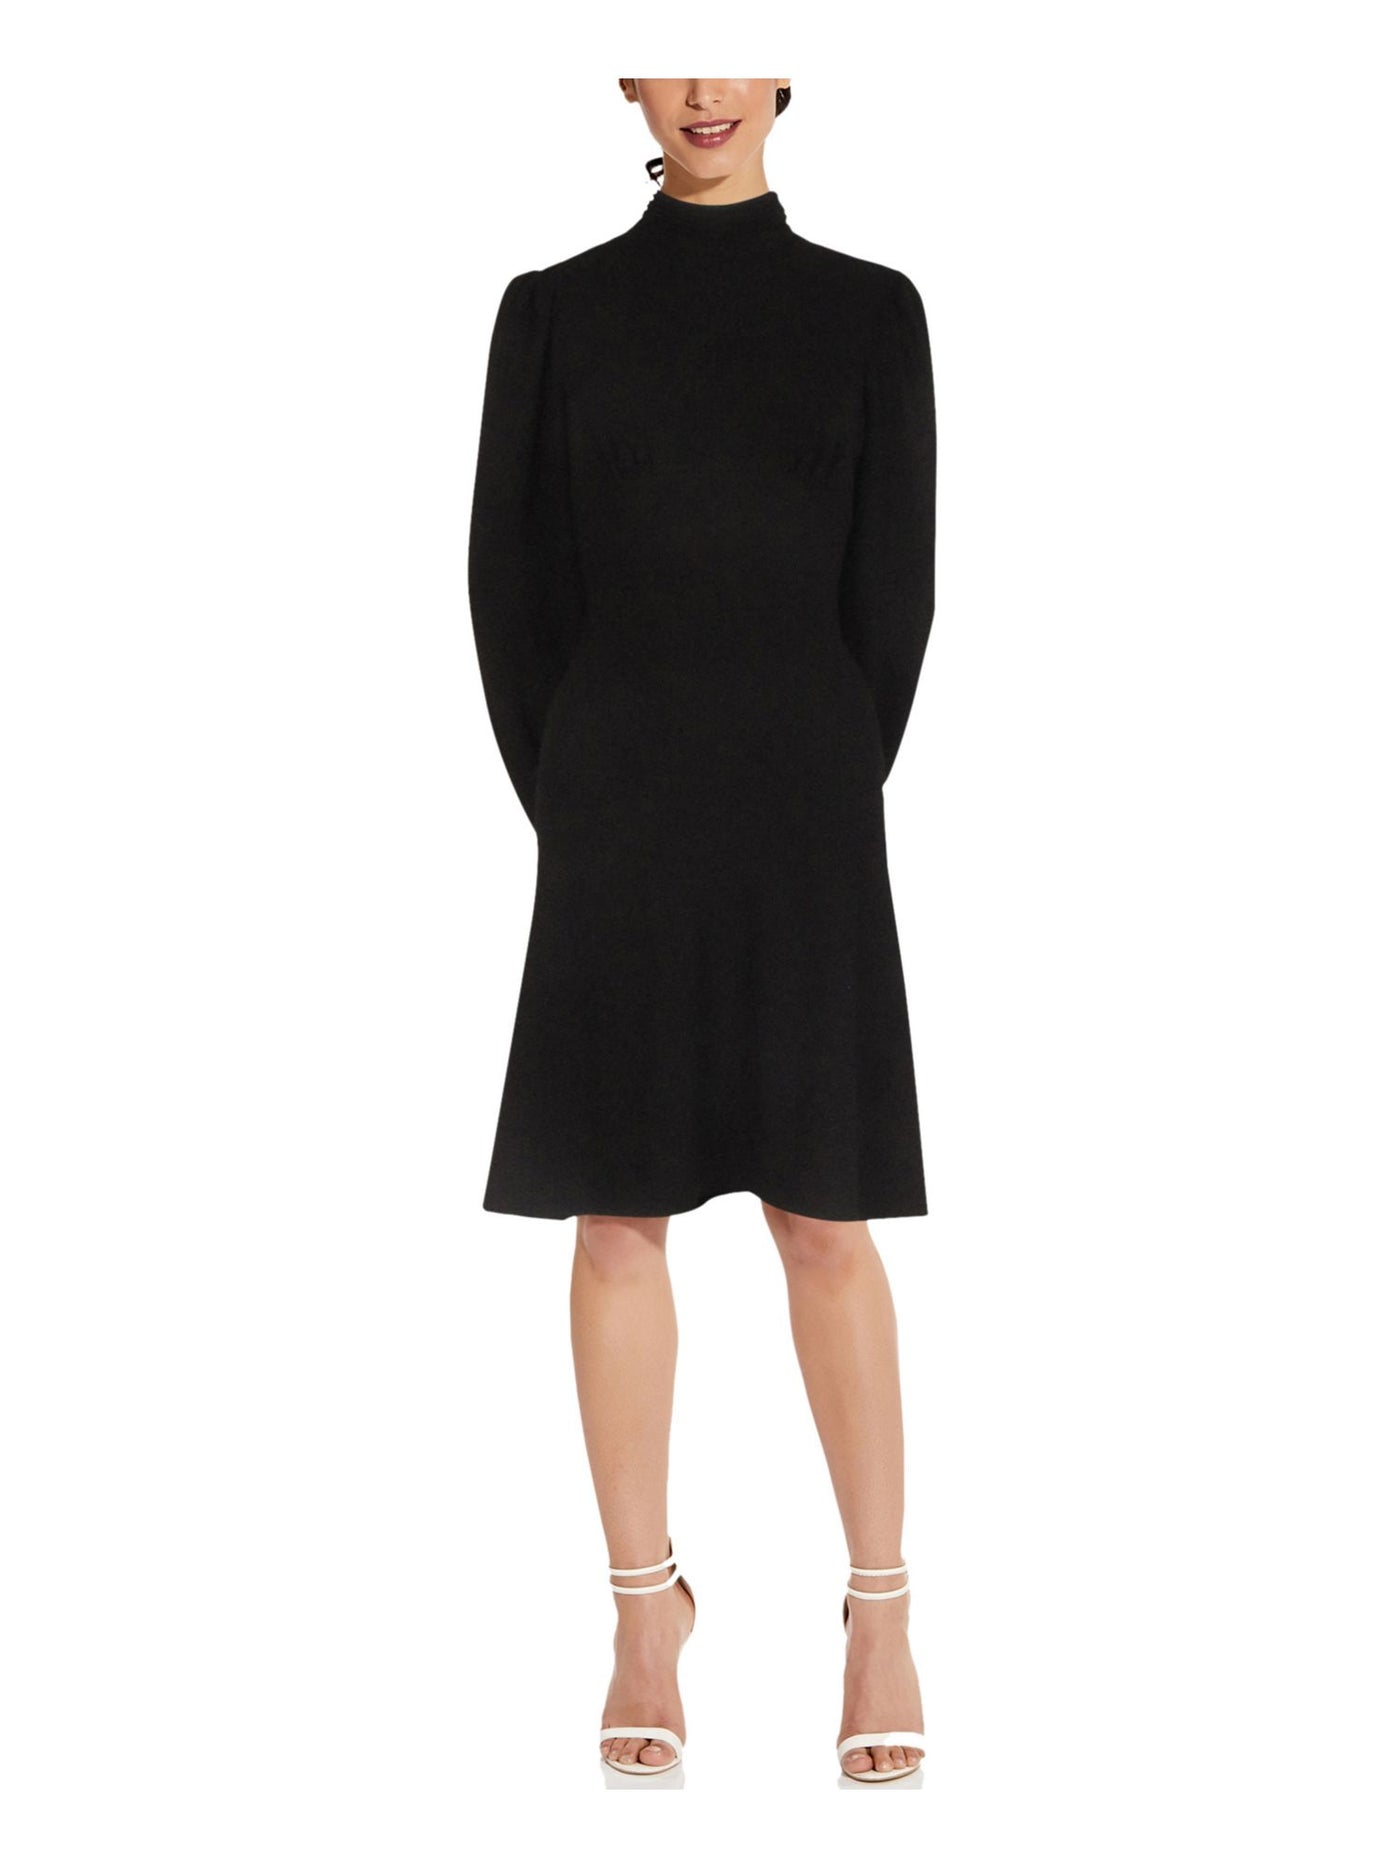 ADRIANNA PAPELL Womens Black Mock Neck Long Sleeve Above The Knee Wear To Work Shift Dress 4